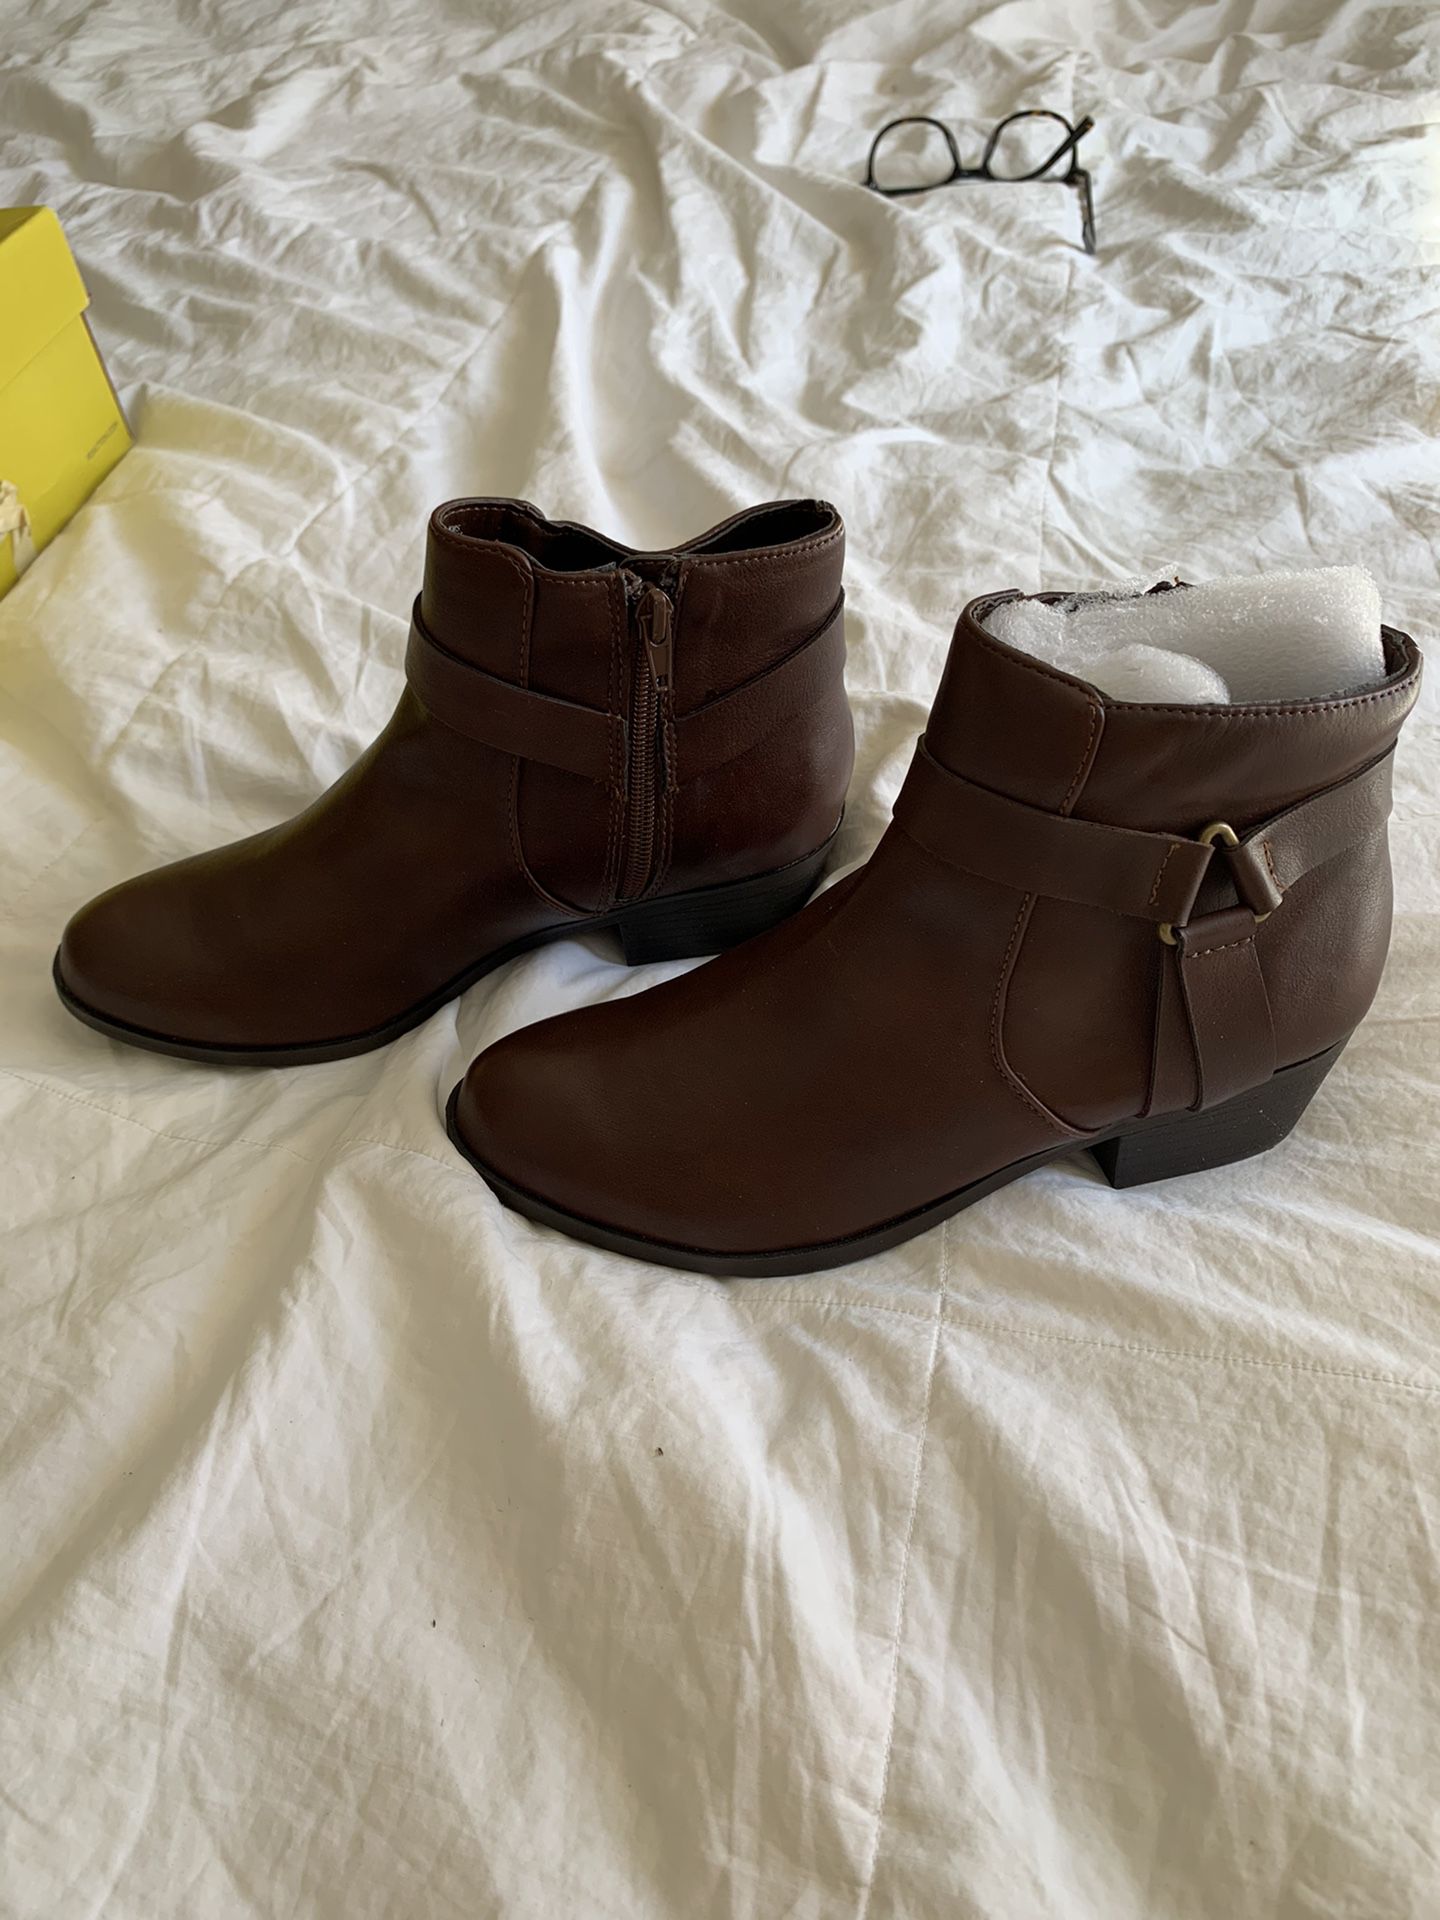 Kenneth Cole Boots size 7